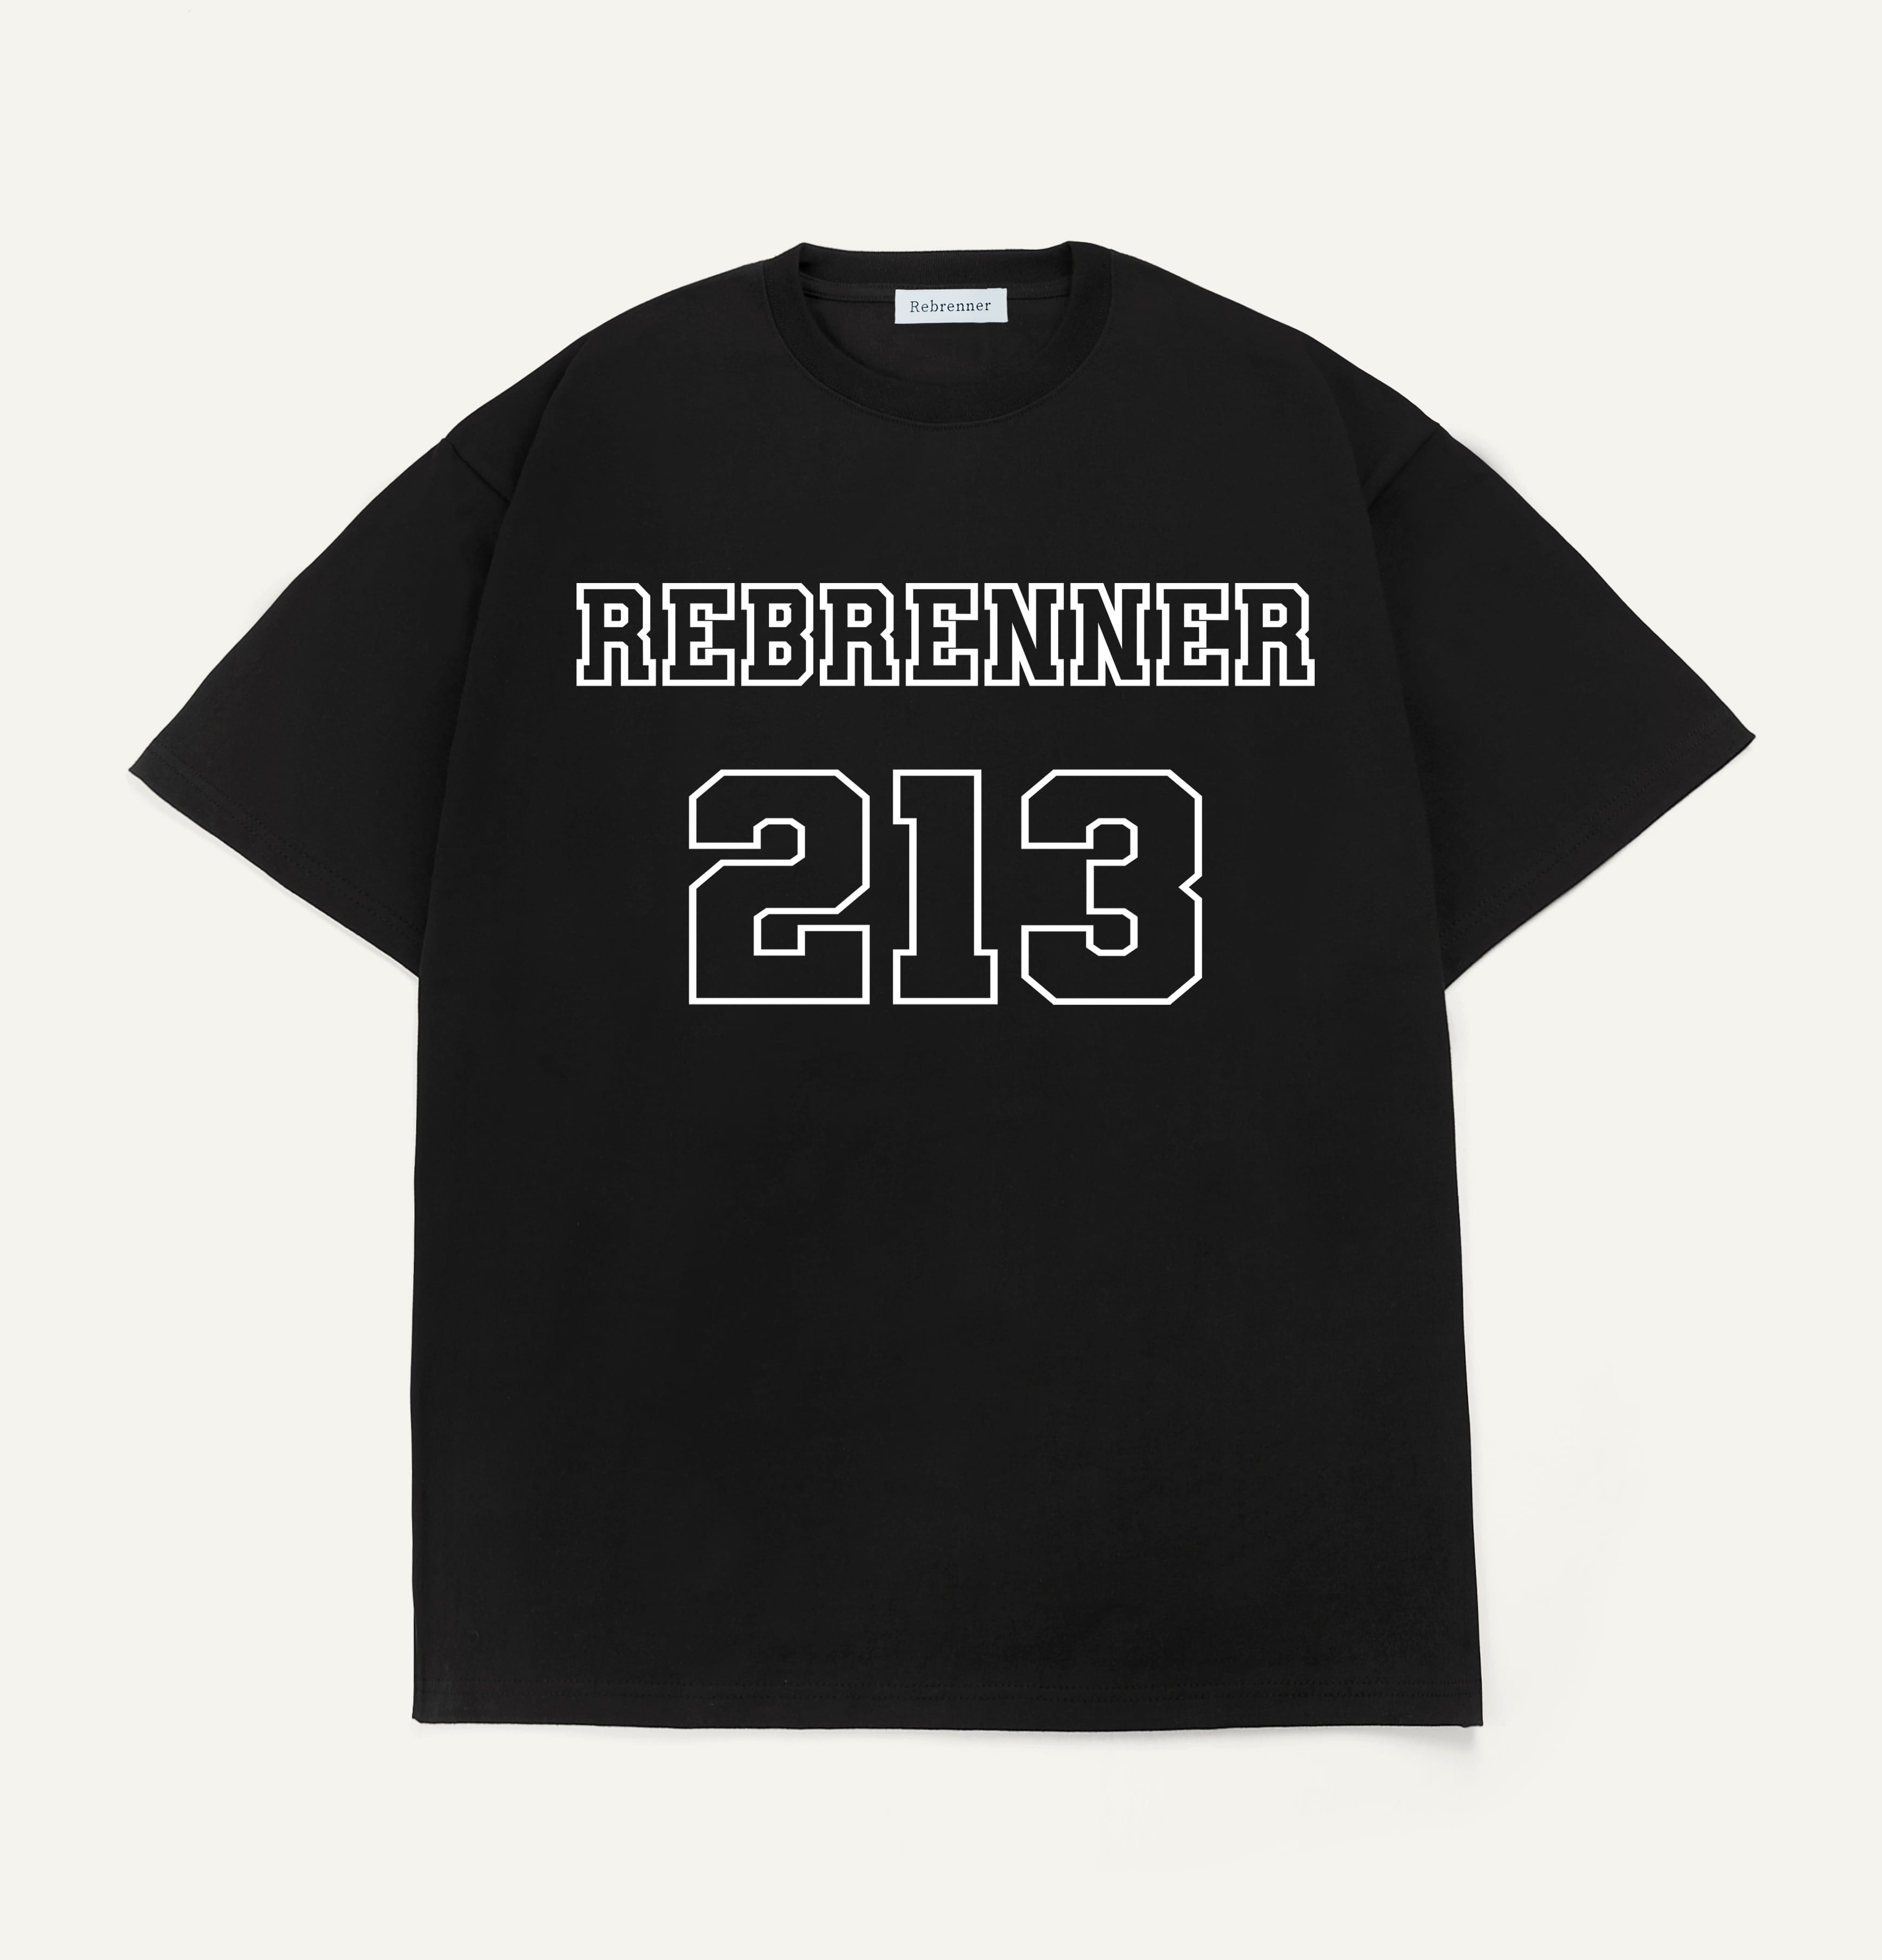 Over fit 213 tee black